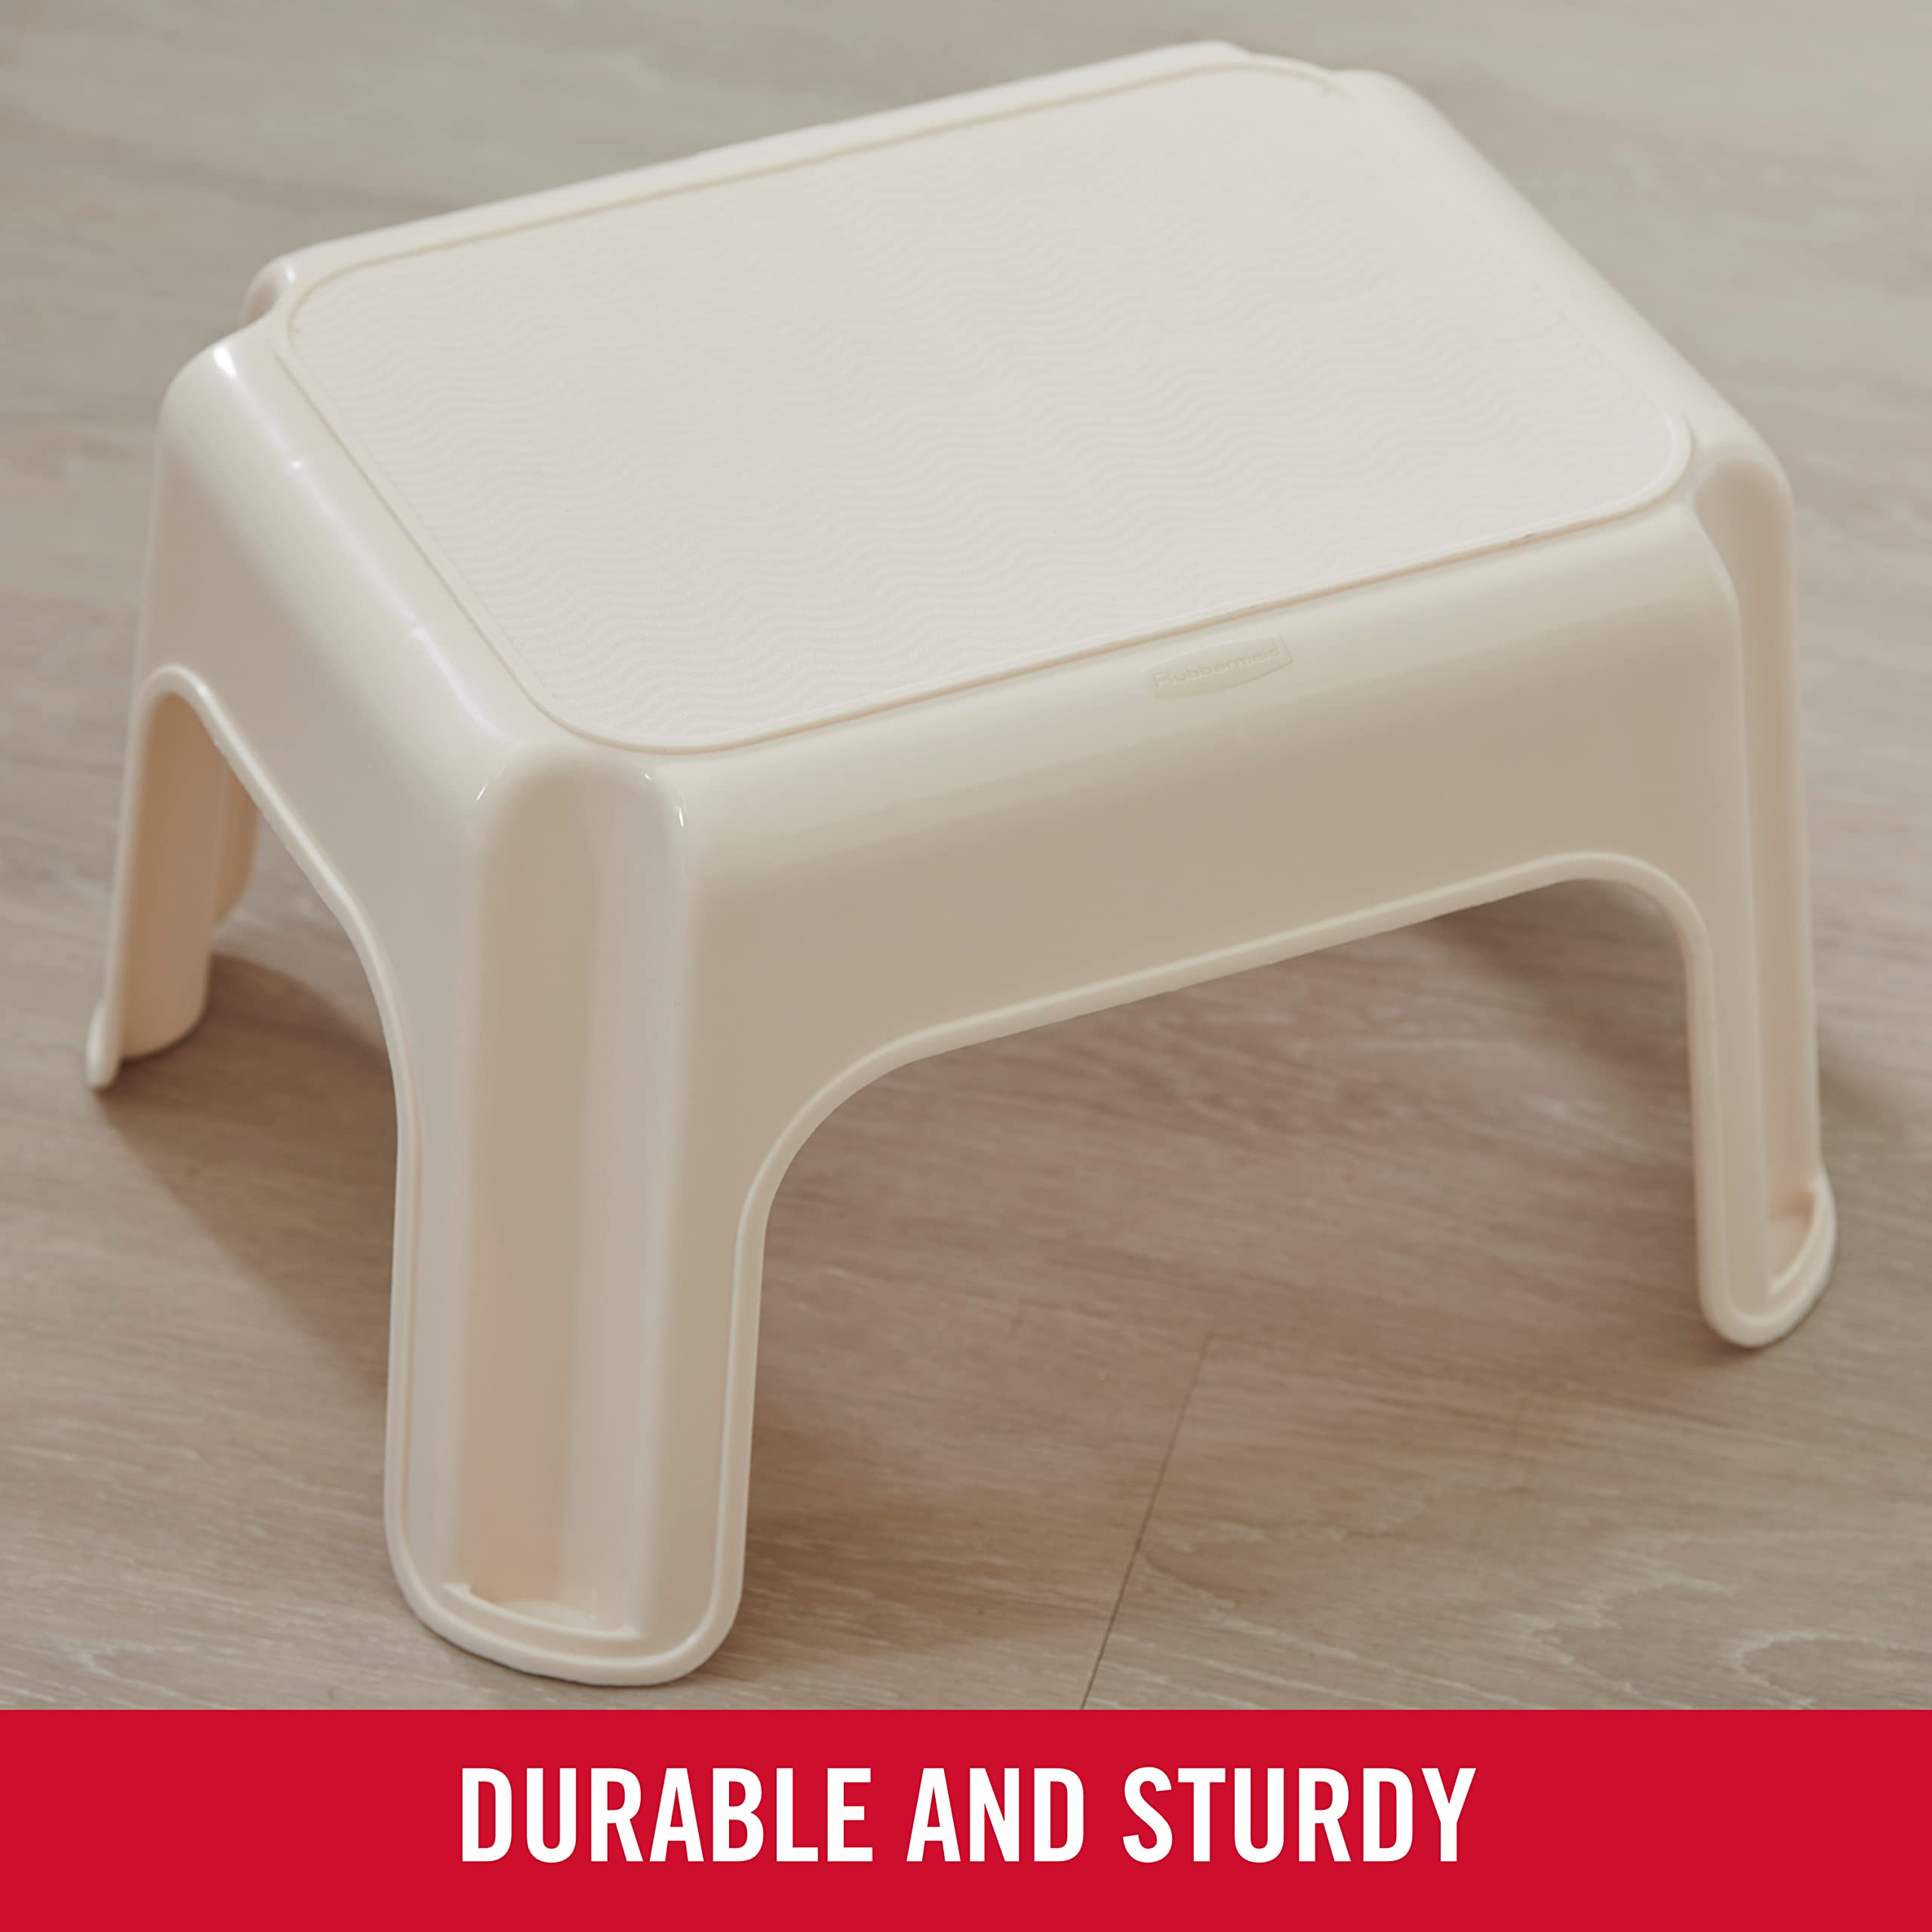 Rubbermaid Roughneck Step-Stool, Bisque, Lightweight, Holds up to 300 pounds, Ideal for Kitchen-Bath, Skid-Resistant